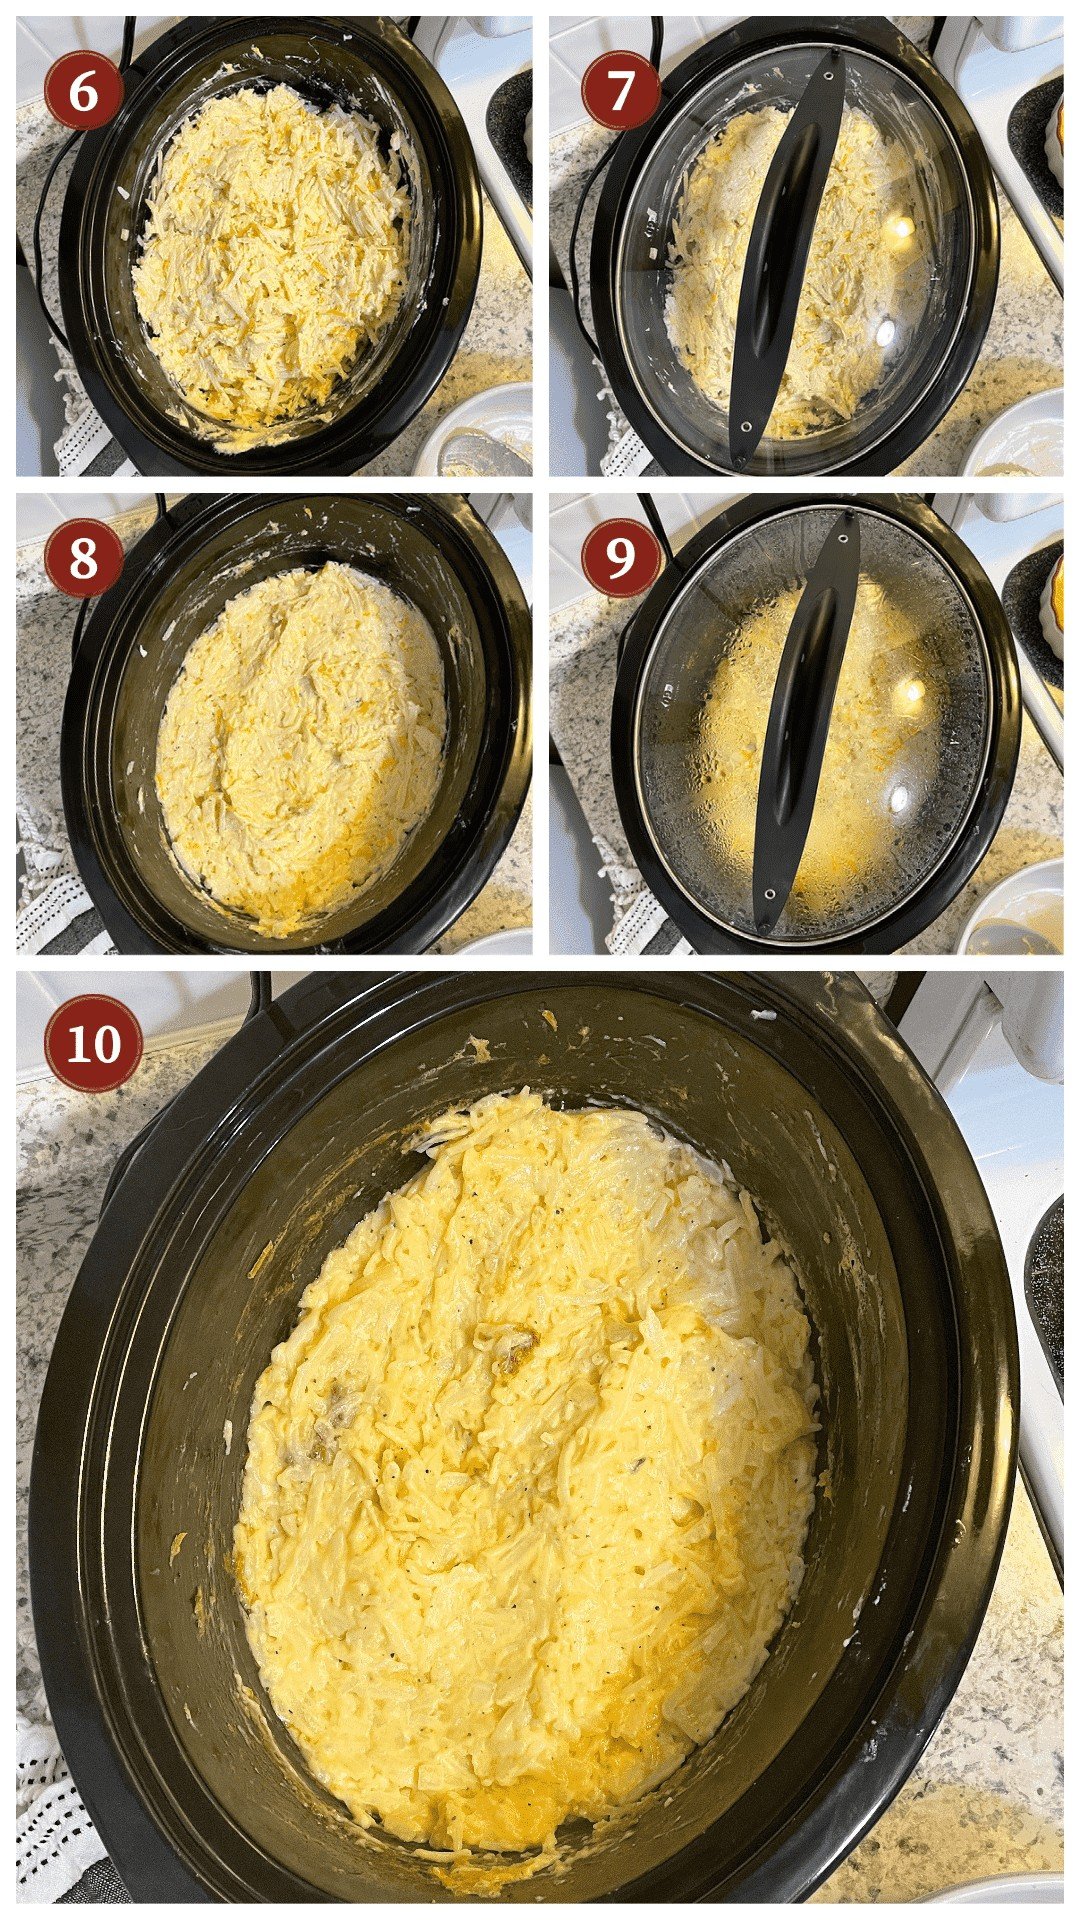 A collage of images showing how to cook cheesy hash brown potatoes in a crock pot, step 6 - 10.